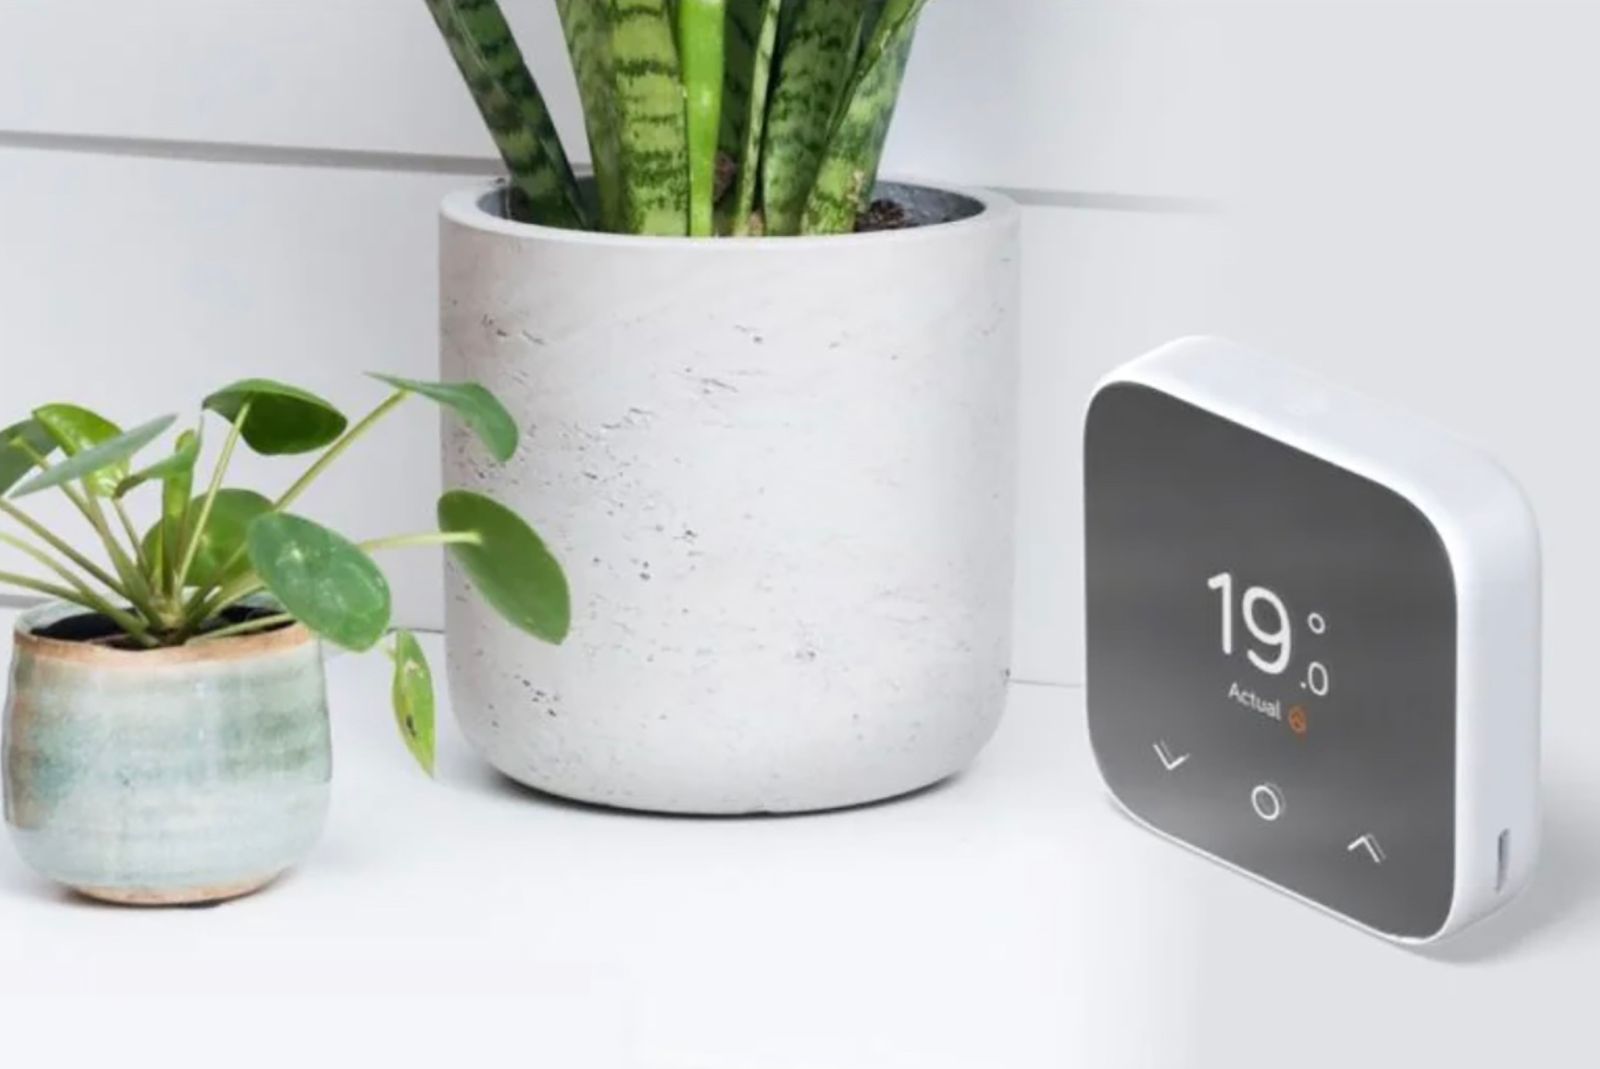 Hive just announced the Mini Thermostat photo 1